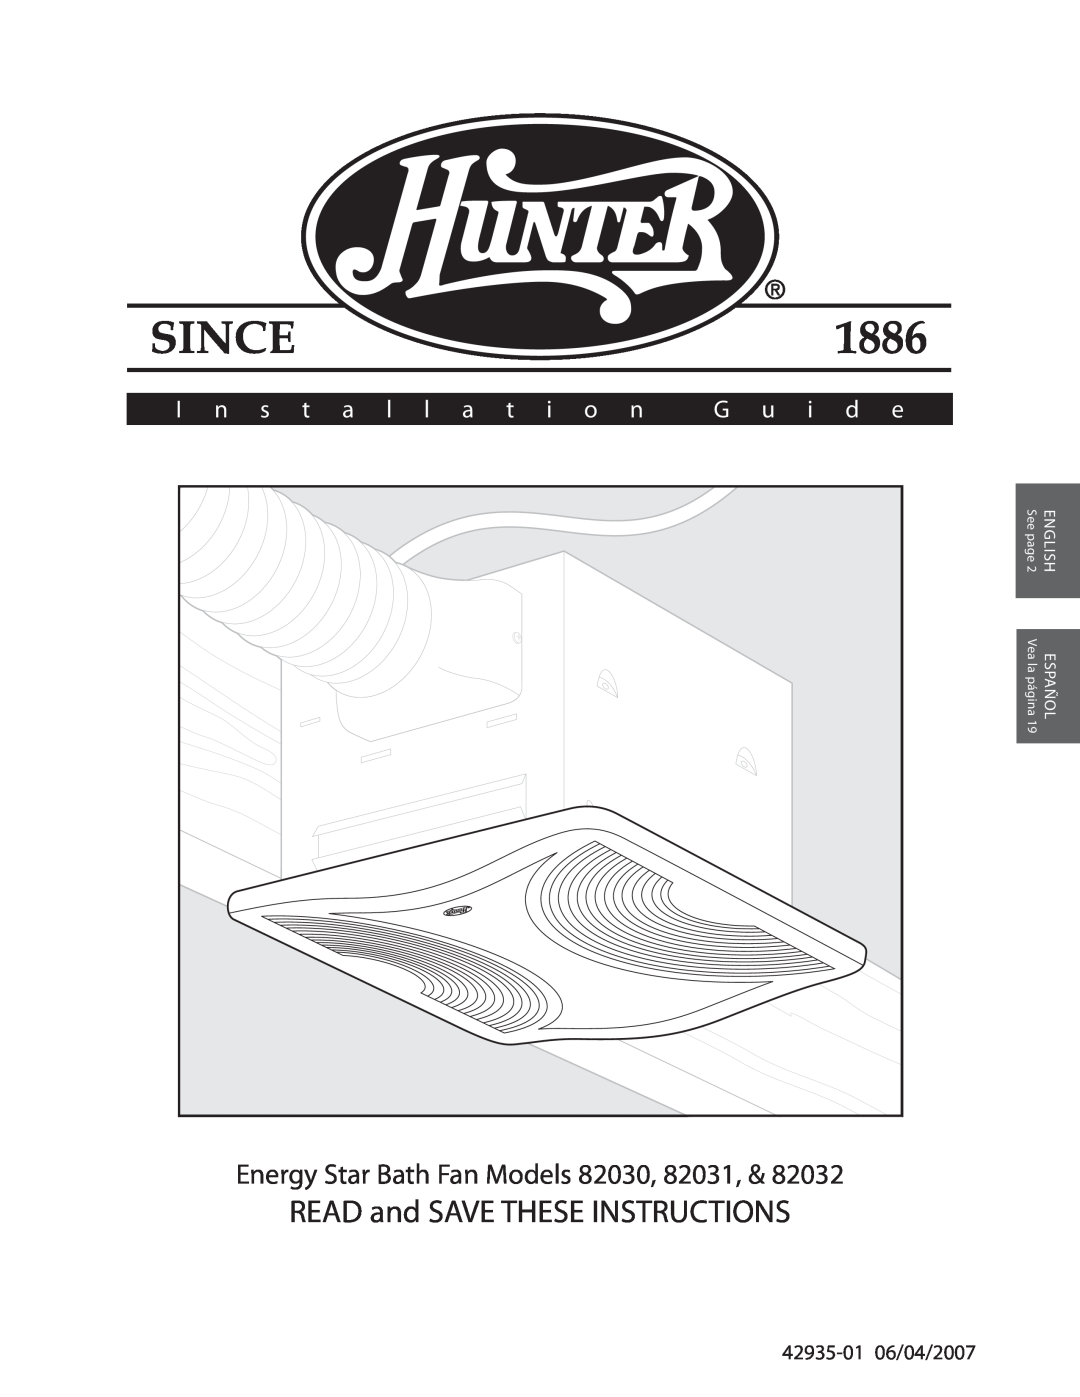 Hunter Fan 82032, 42935-0, 82030 manual READ and SAVE THESE INSTRUCTIONS, Energy Star Bath Fan Models 